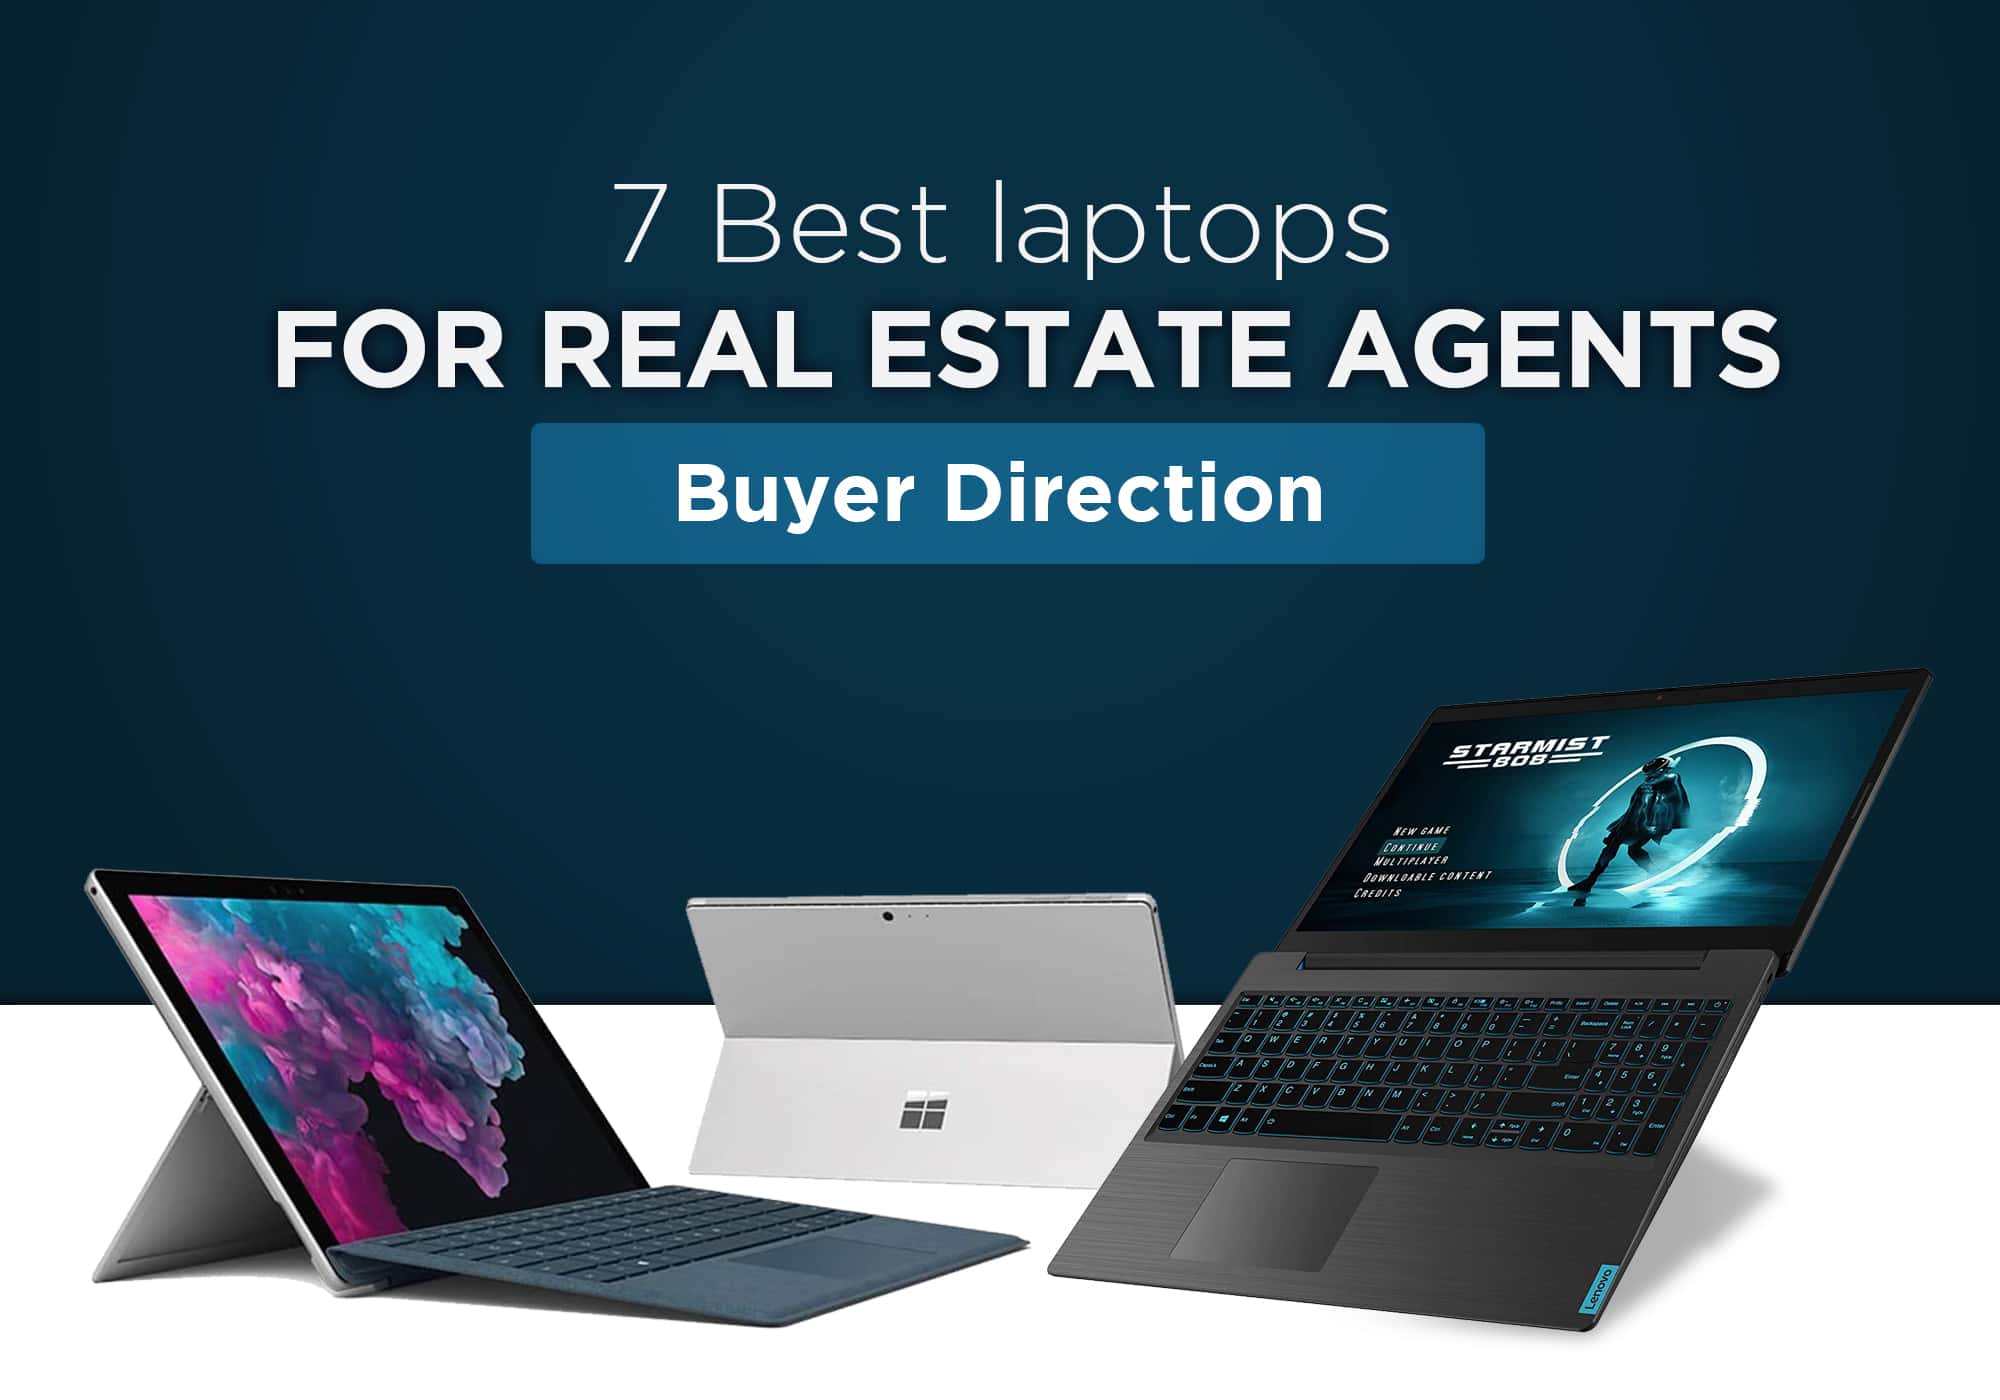 7 Best Laptops For Real Estate Agents